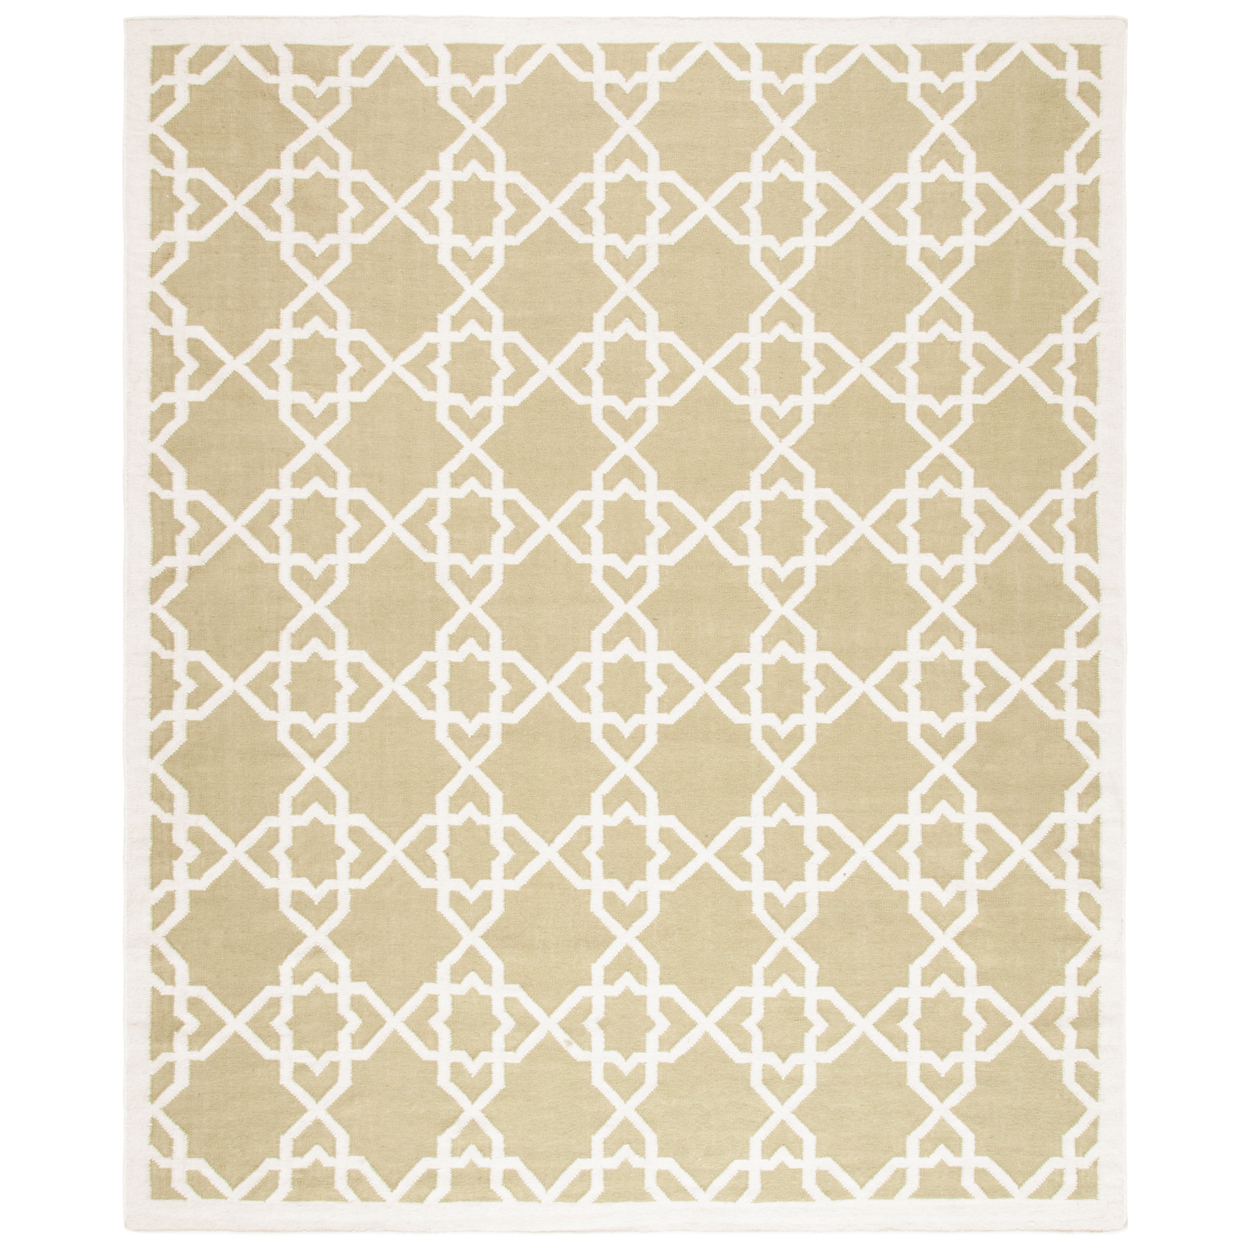 SAFAVIEH Dhurries DHU548A Handwoven Olive / Ivory Rug - 9' X 12'